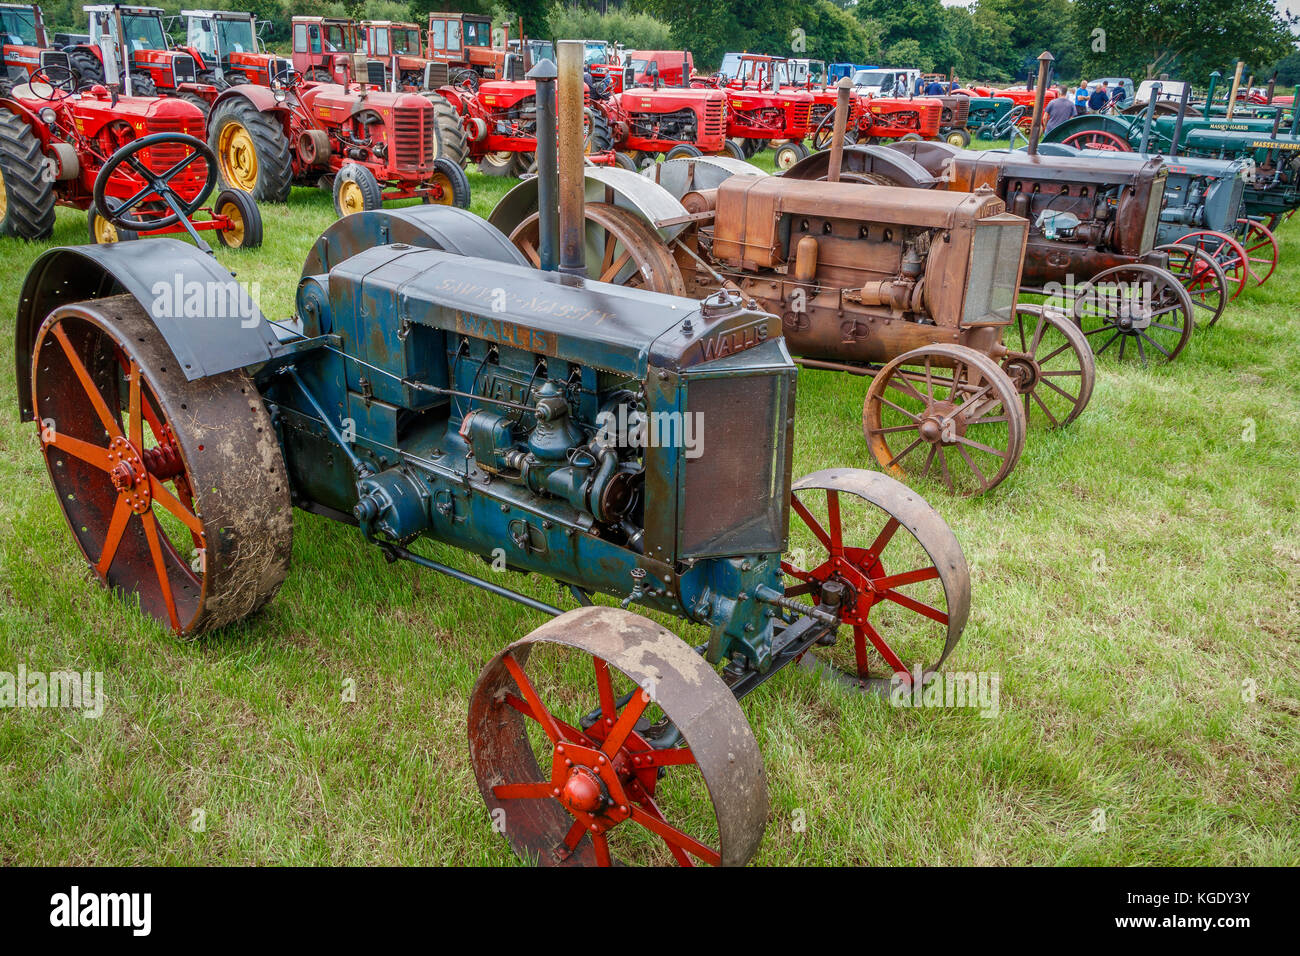 1917 Wallis K Series tractor with steel wheels on display with other historic vehicles at the 2017 Norfolk Starting Handle Club Show, UK. Stock Photo